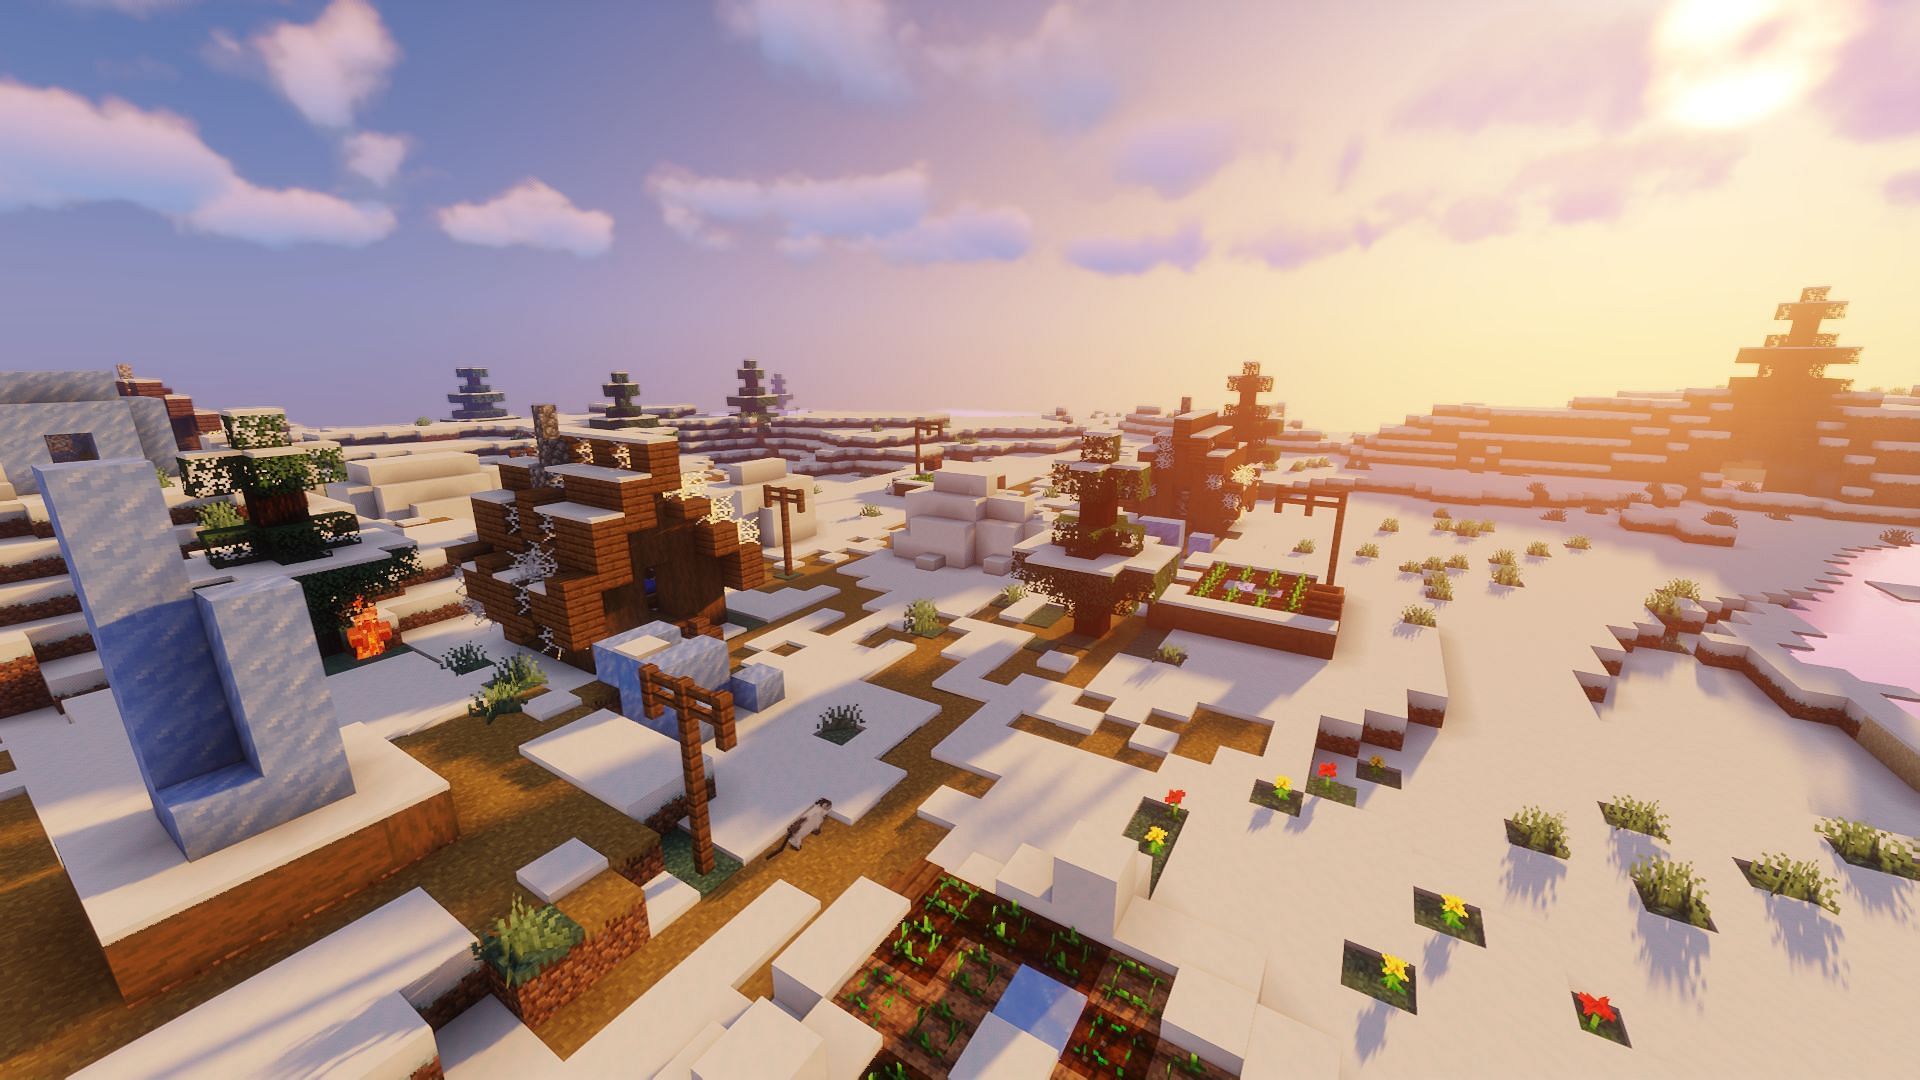 The zombie village found near spawn using the seed (Image via Minecraft)